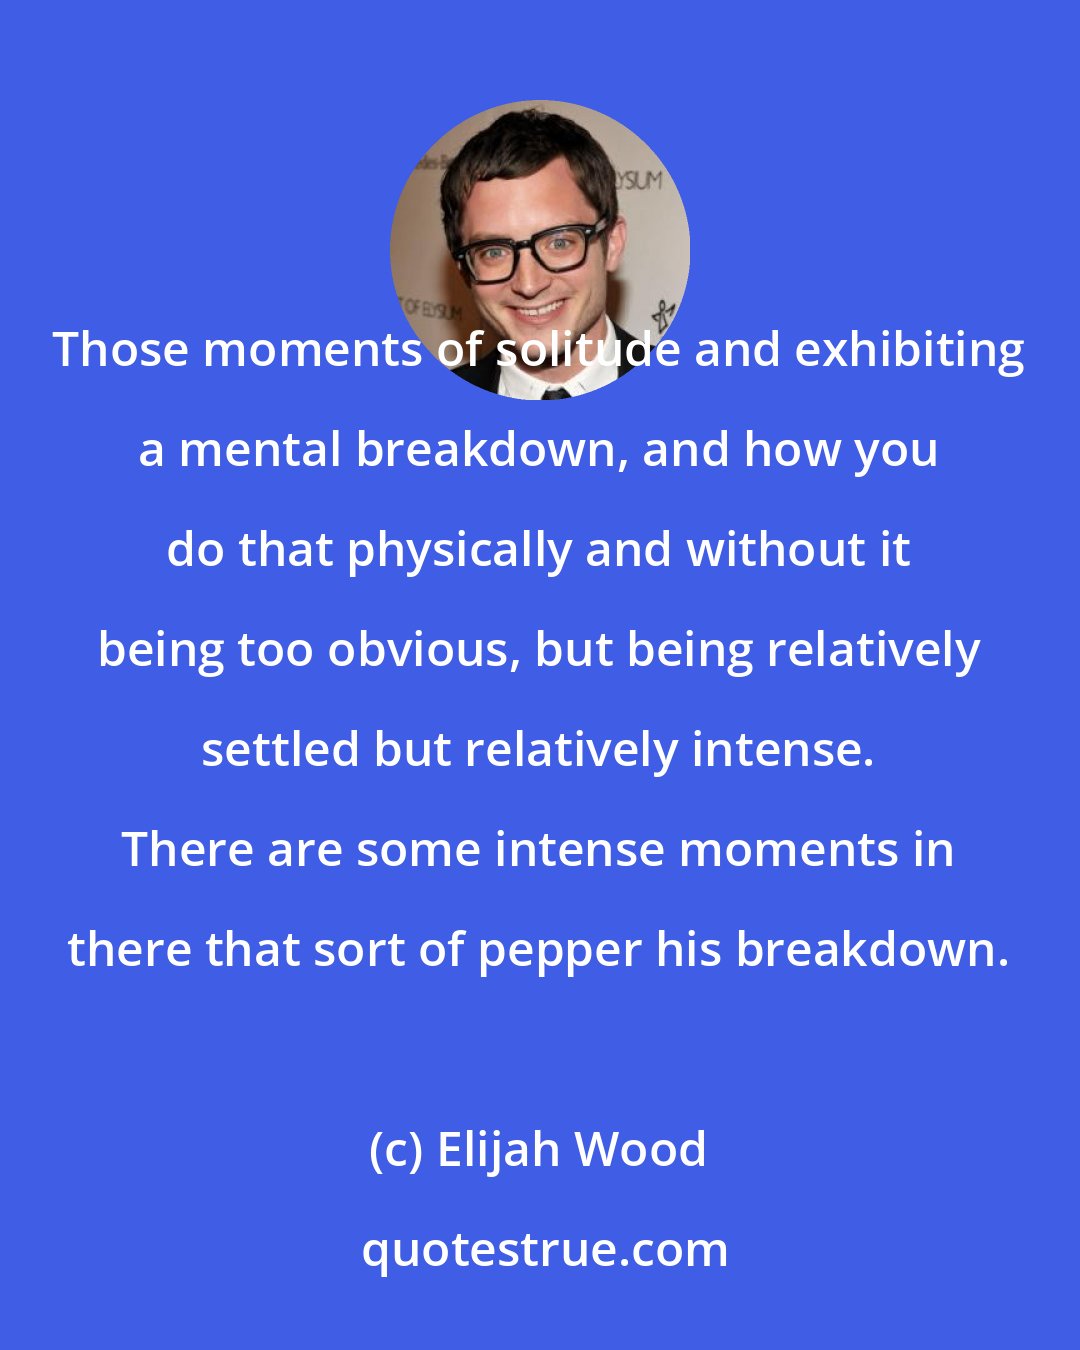 Elijah Wood: Those moments of solitude and exhibiting a mental breakdown, and how you do that physically and without it being too obvious, but being relatively settled but relatively intense. There are some intense moments in there that sort of pepper his breakdown.